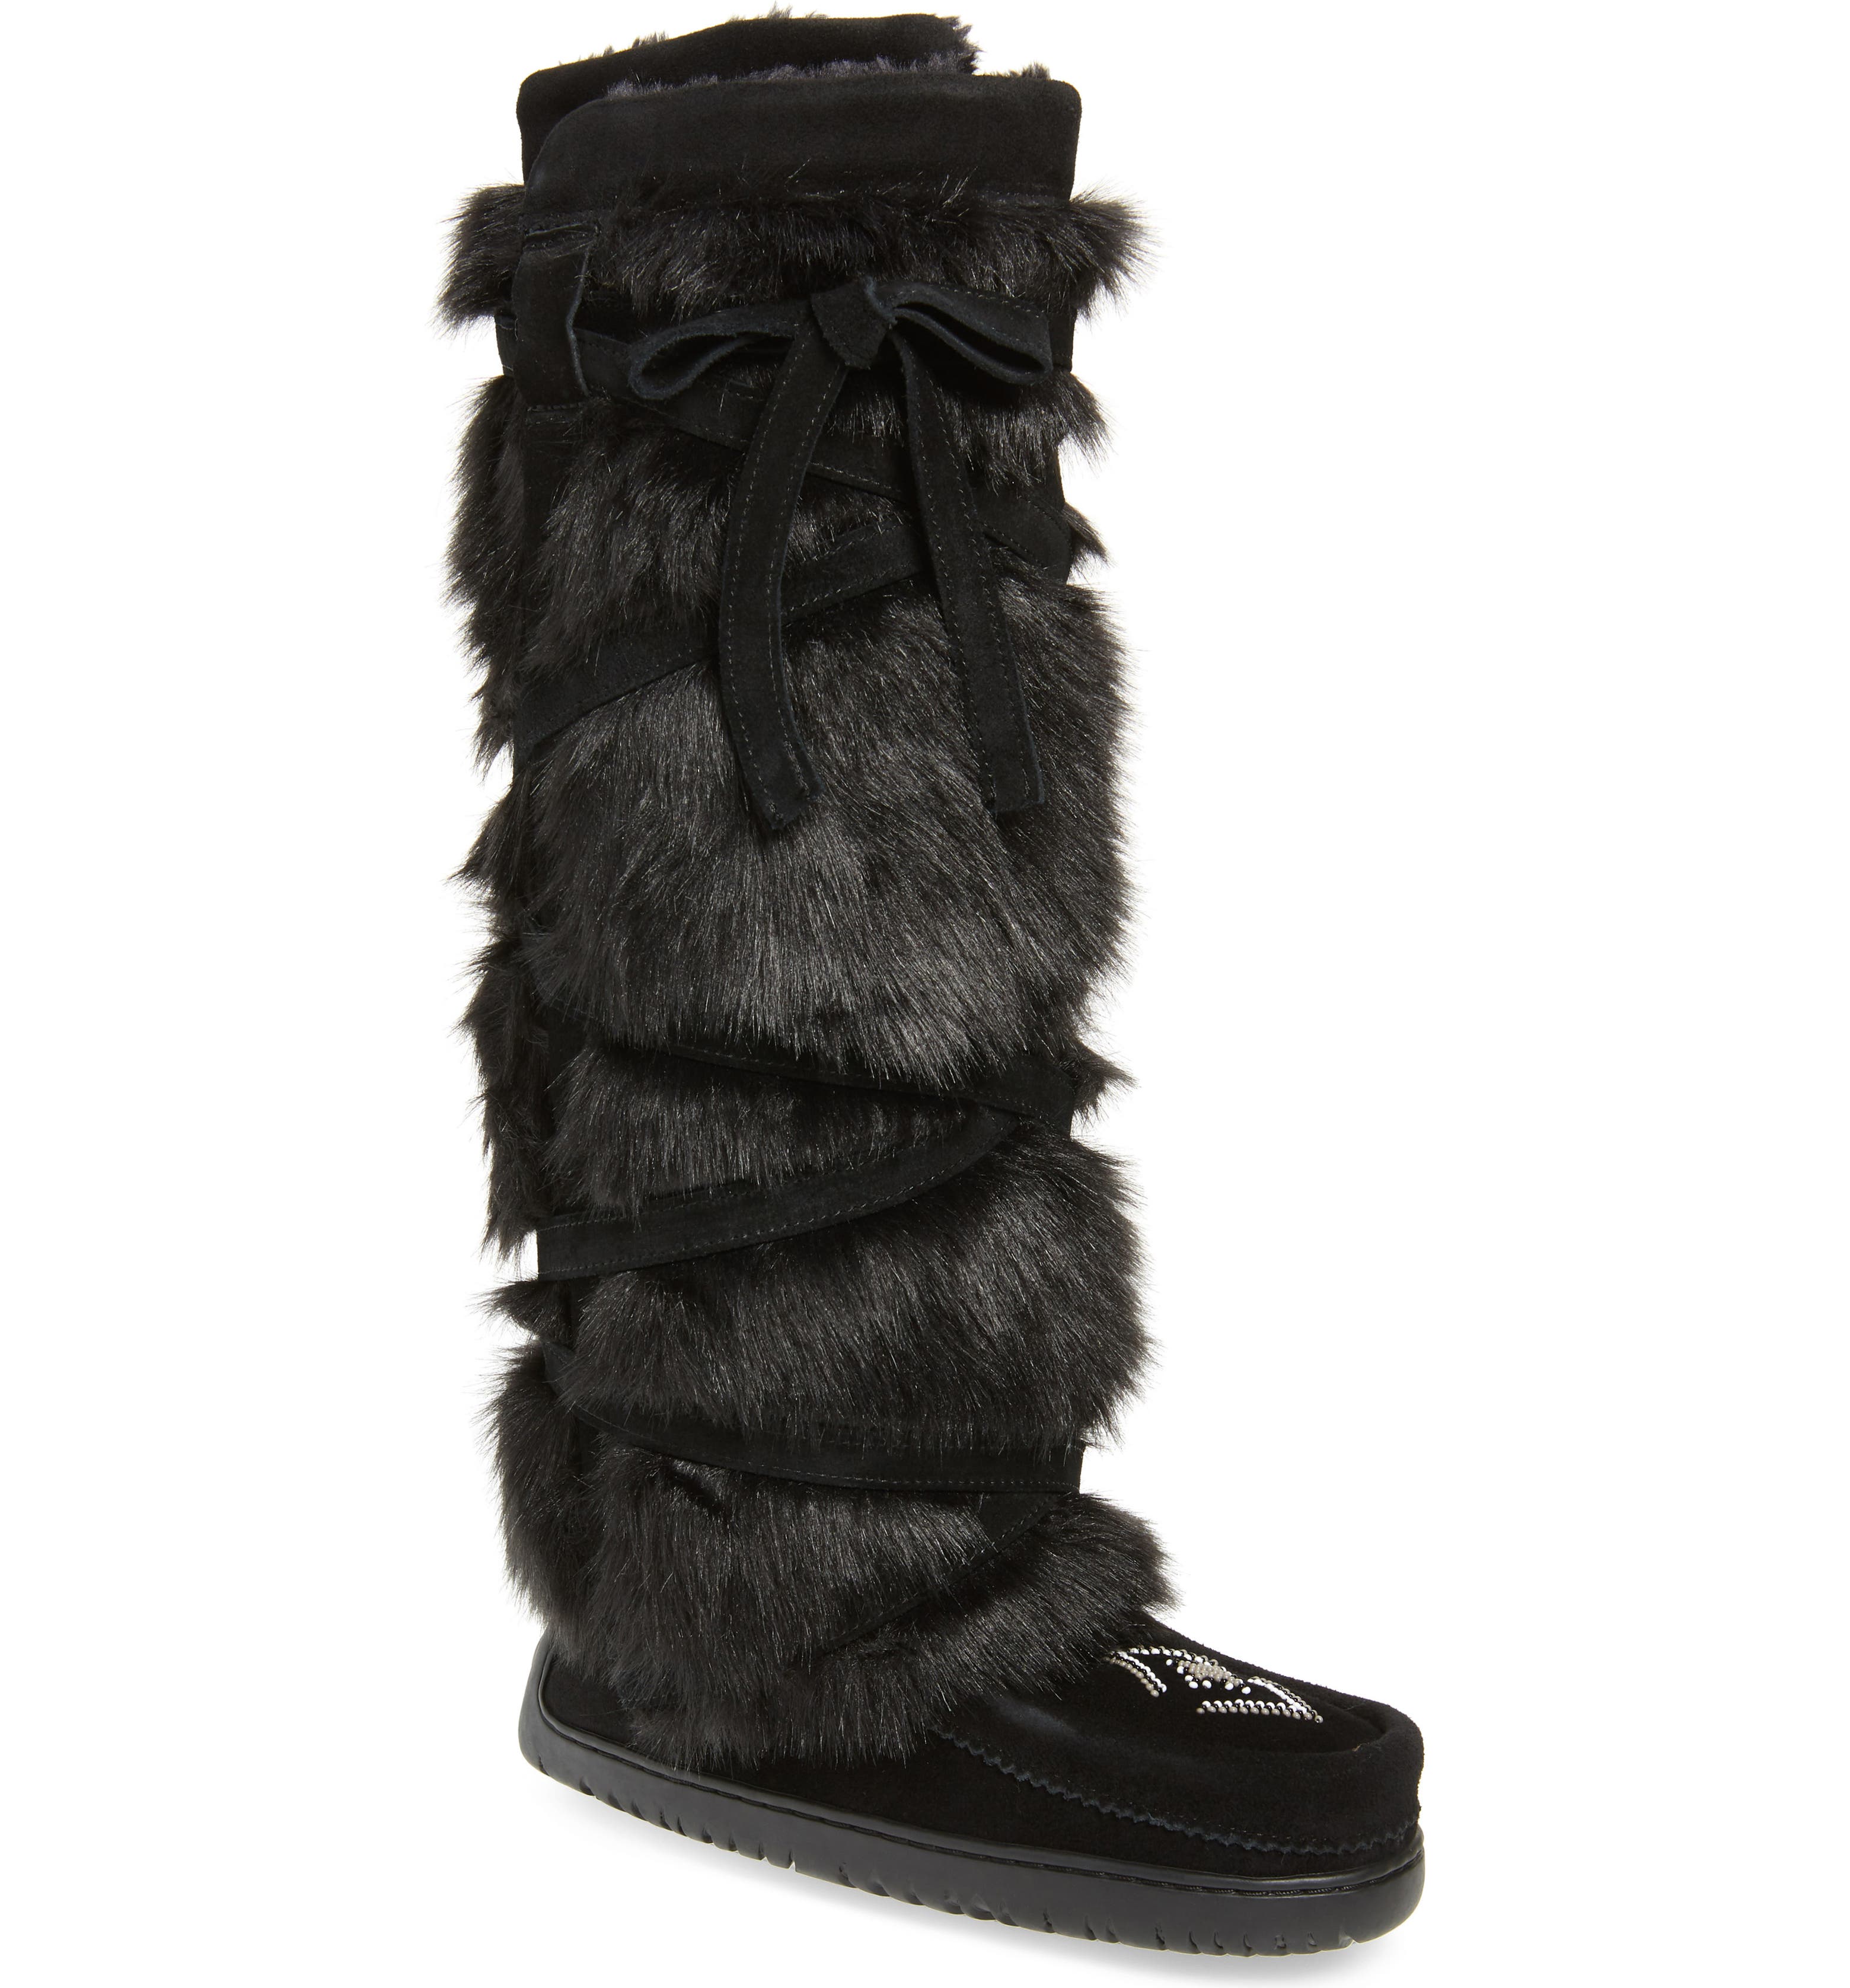 Manitobah Mukluks Tall Wrap Faux Fur And Shearling Boot Women Wide Calf Nordstrom